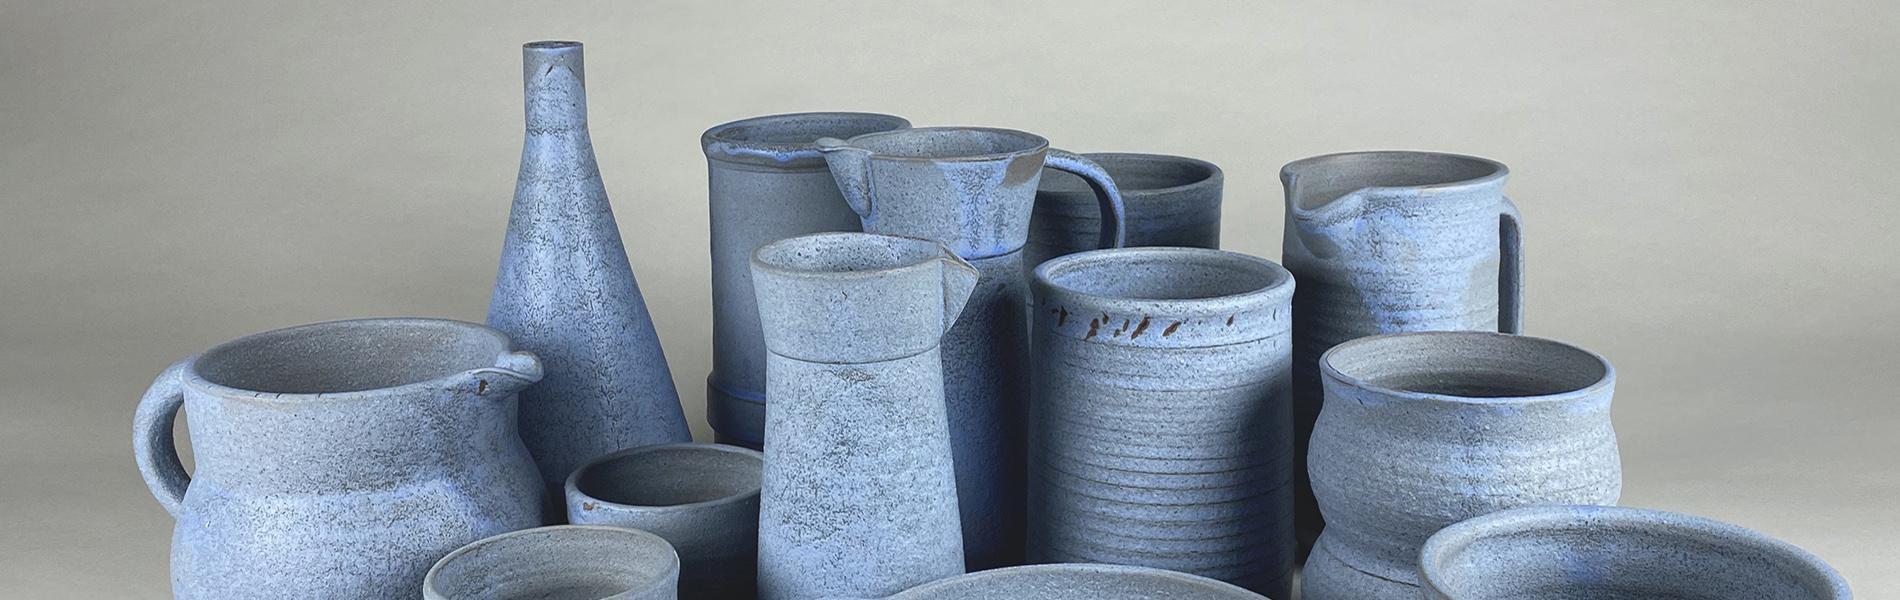 The Ceramics Program offers knowledge, aesthetics, technical approaches and invention through hands-on experiences with raw materials and technical processes. 